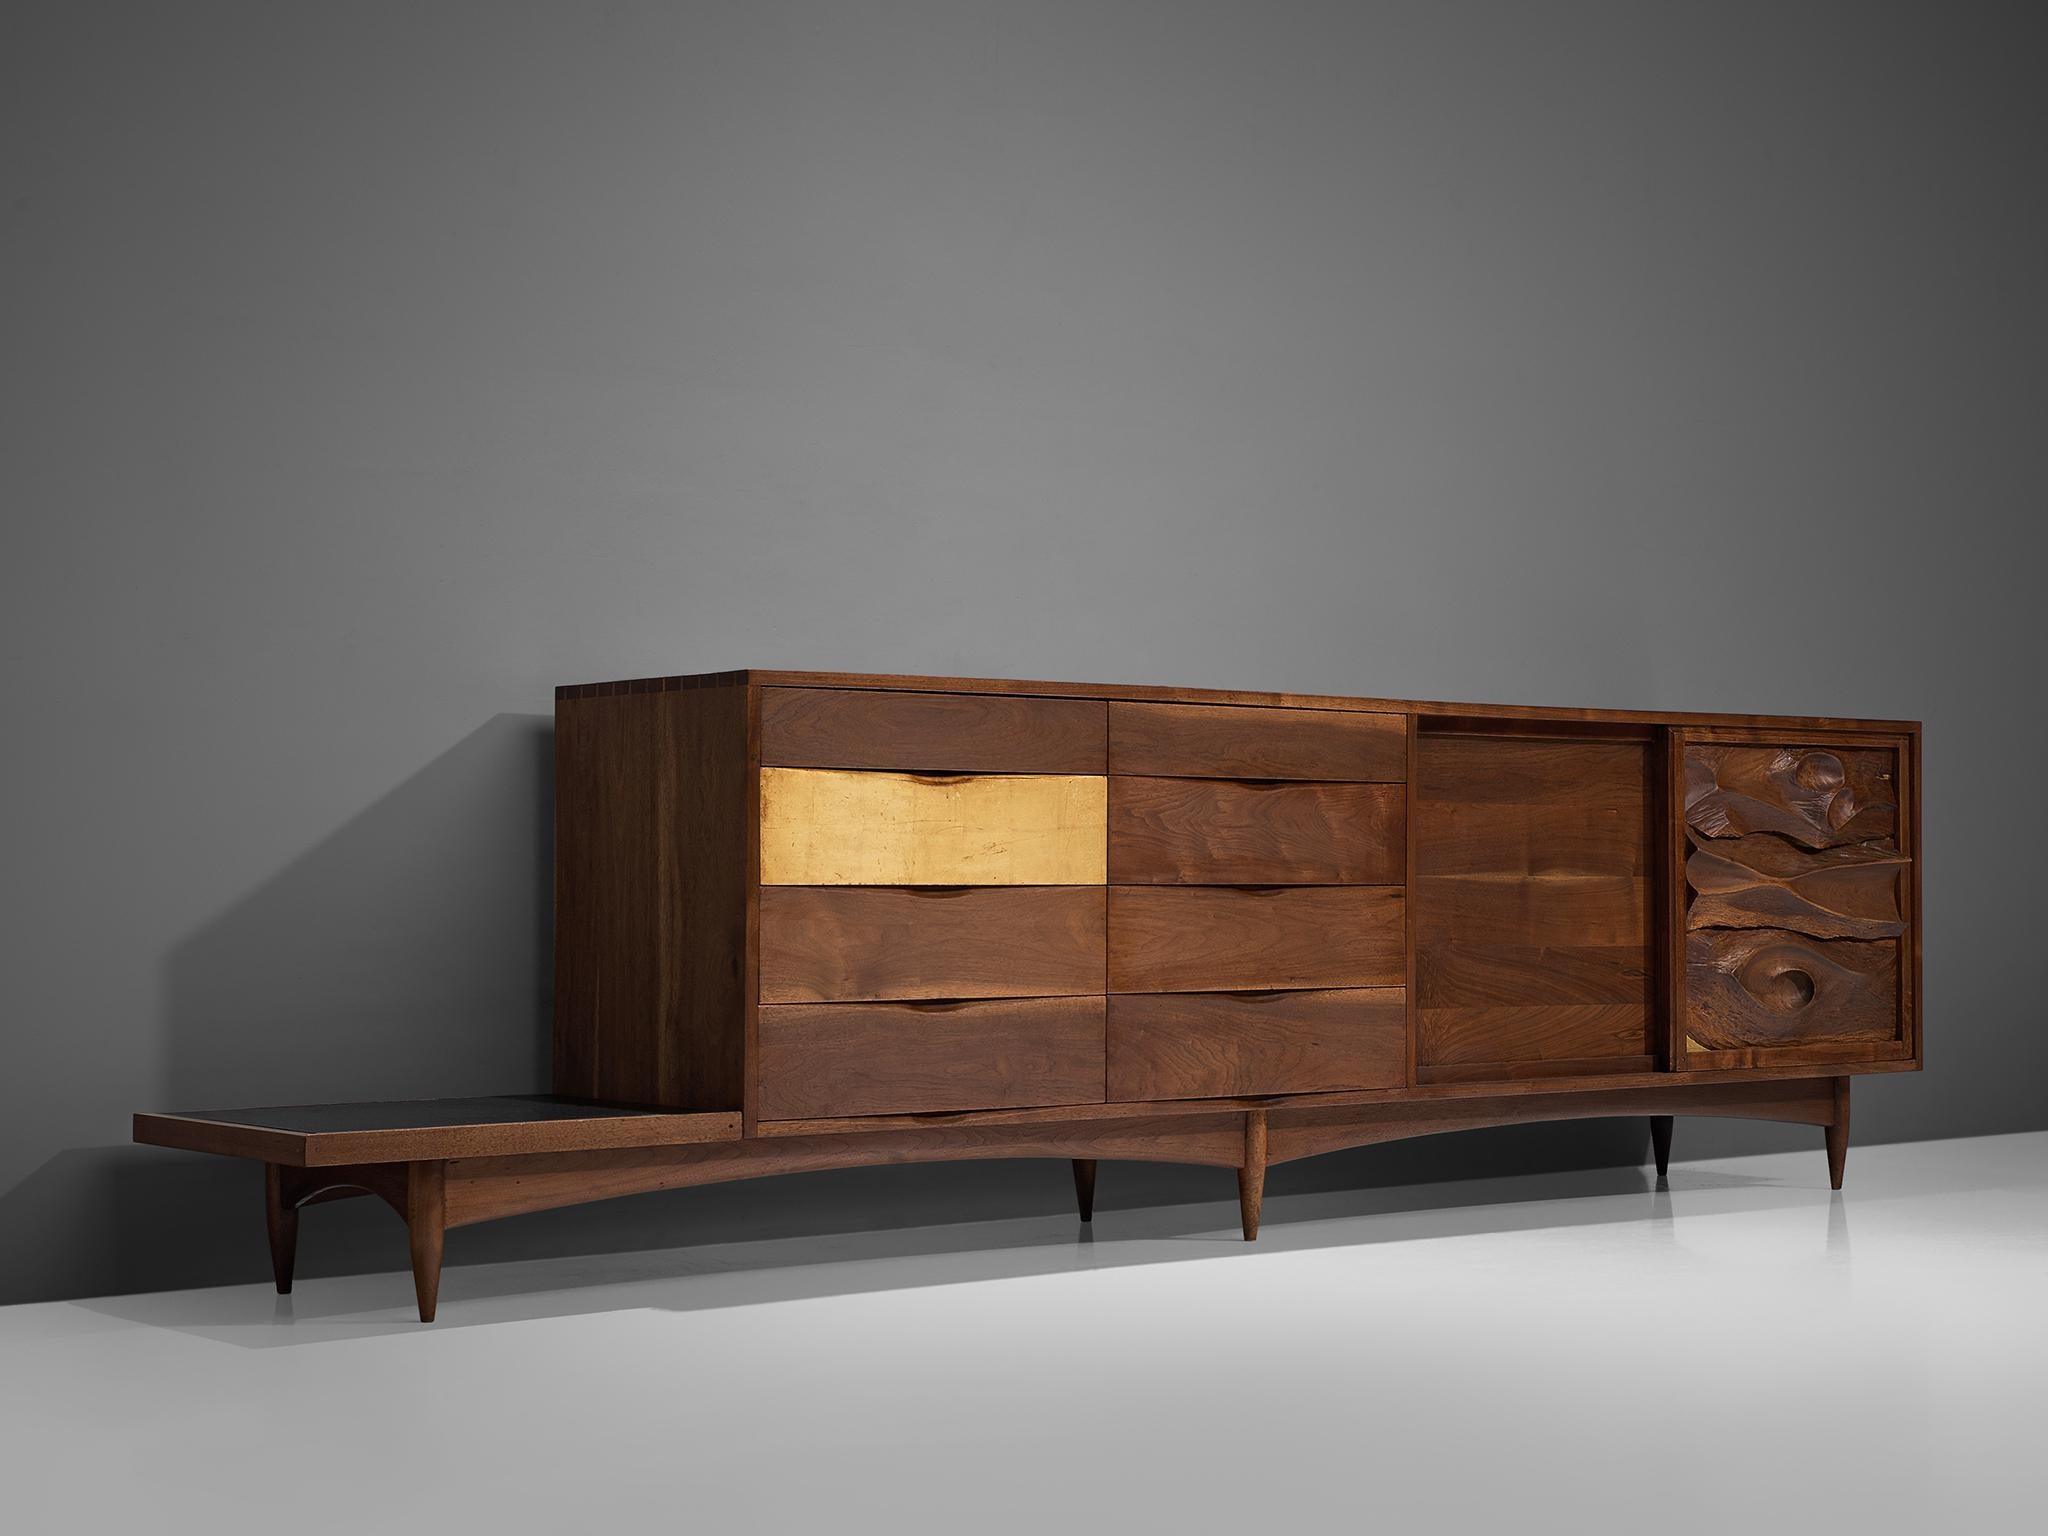 Phillip Lloyd Powell, cabinet, American black walnut, giltwood and slate, New Hope, United States, early 1960s.

This exquisite large sideboard is designed by Phillip Lloyd Powell and executed in solid black walnut. The cabinet consists of four